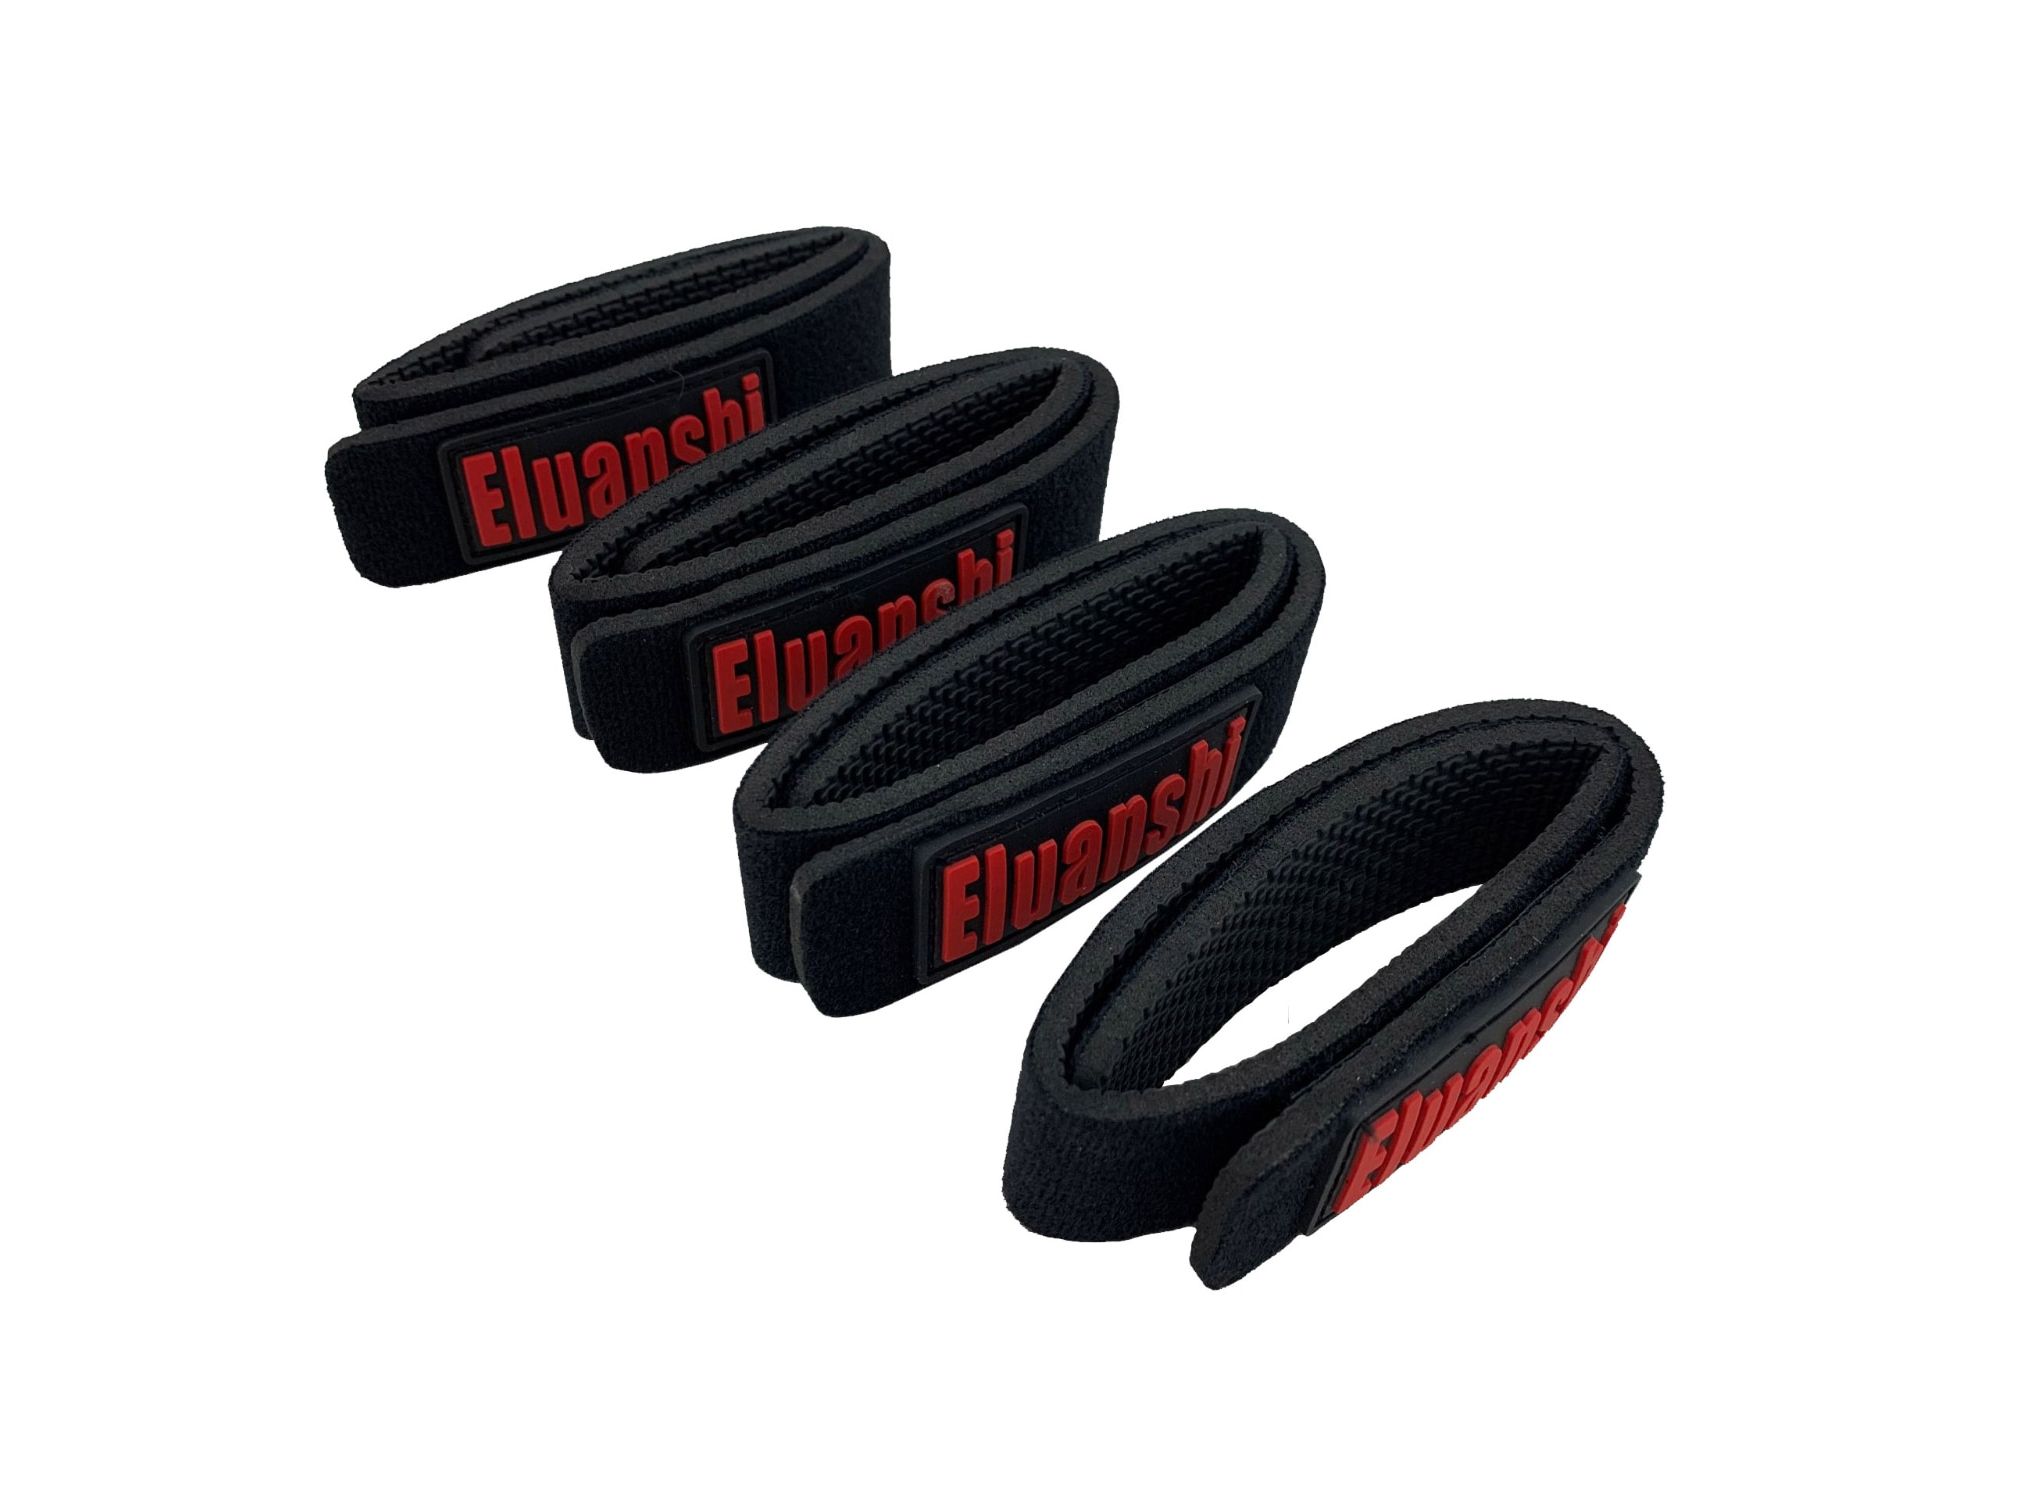 4 pieces Fishing Rod Belt Strap rope combo platform reel Accessories peche  carp for ice box Tackle pesca Lure ELUOSHI, Fishing Tackle Boxes